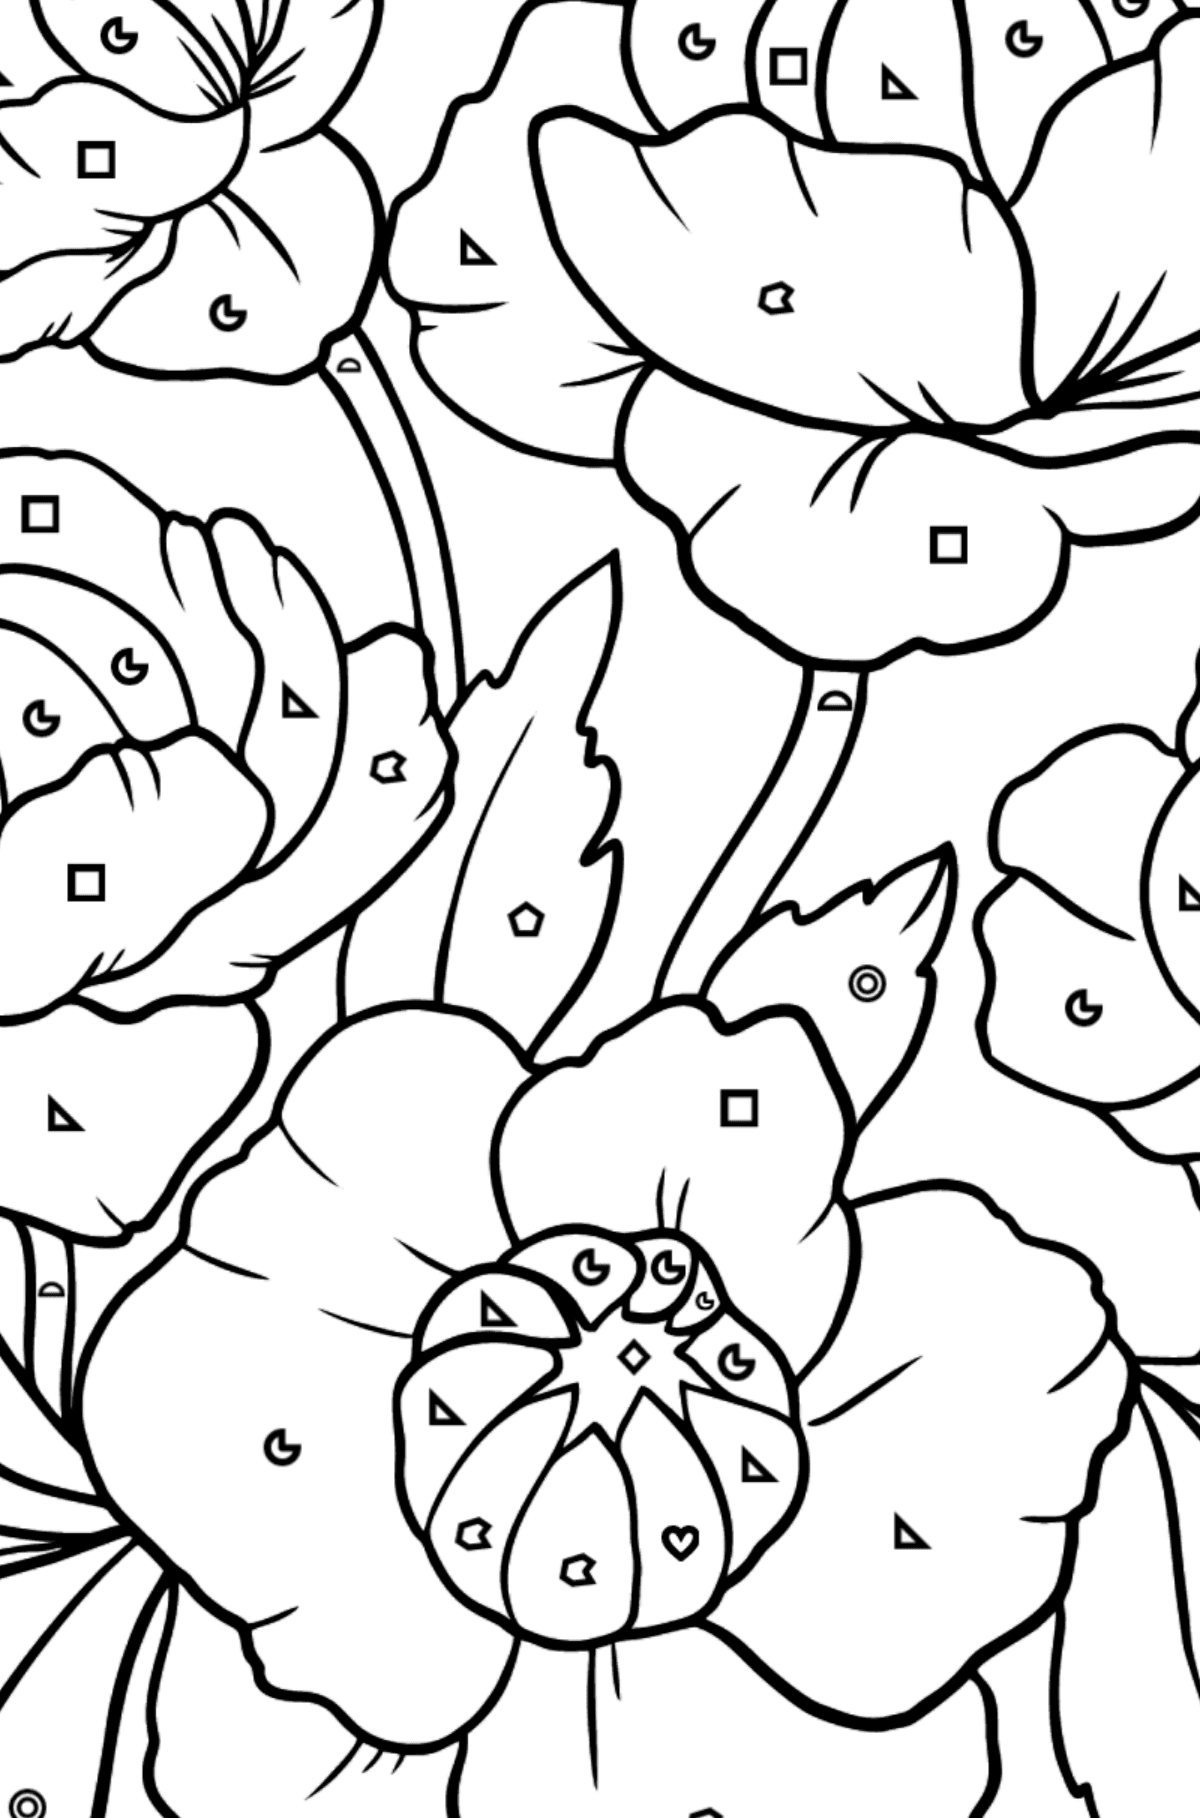 Red Globeflower Coloring Page - Coloring by Geometric Shapes for Kids